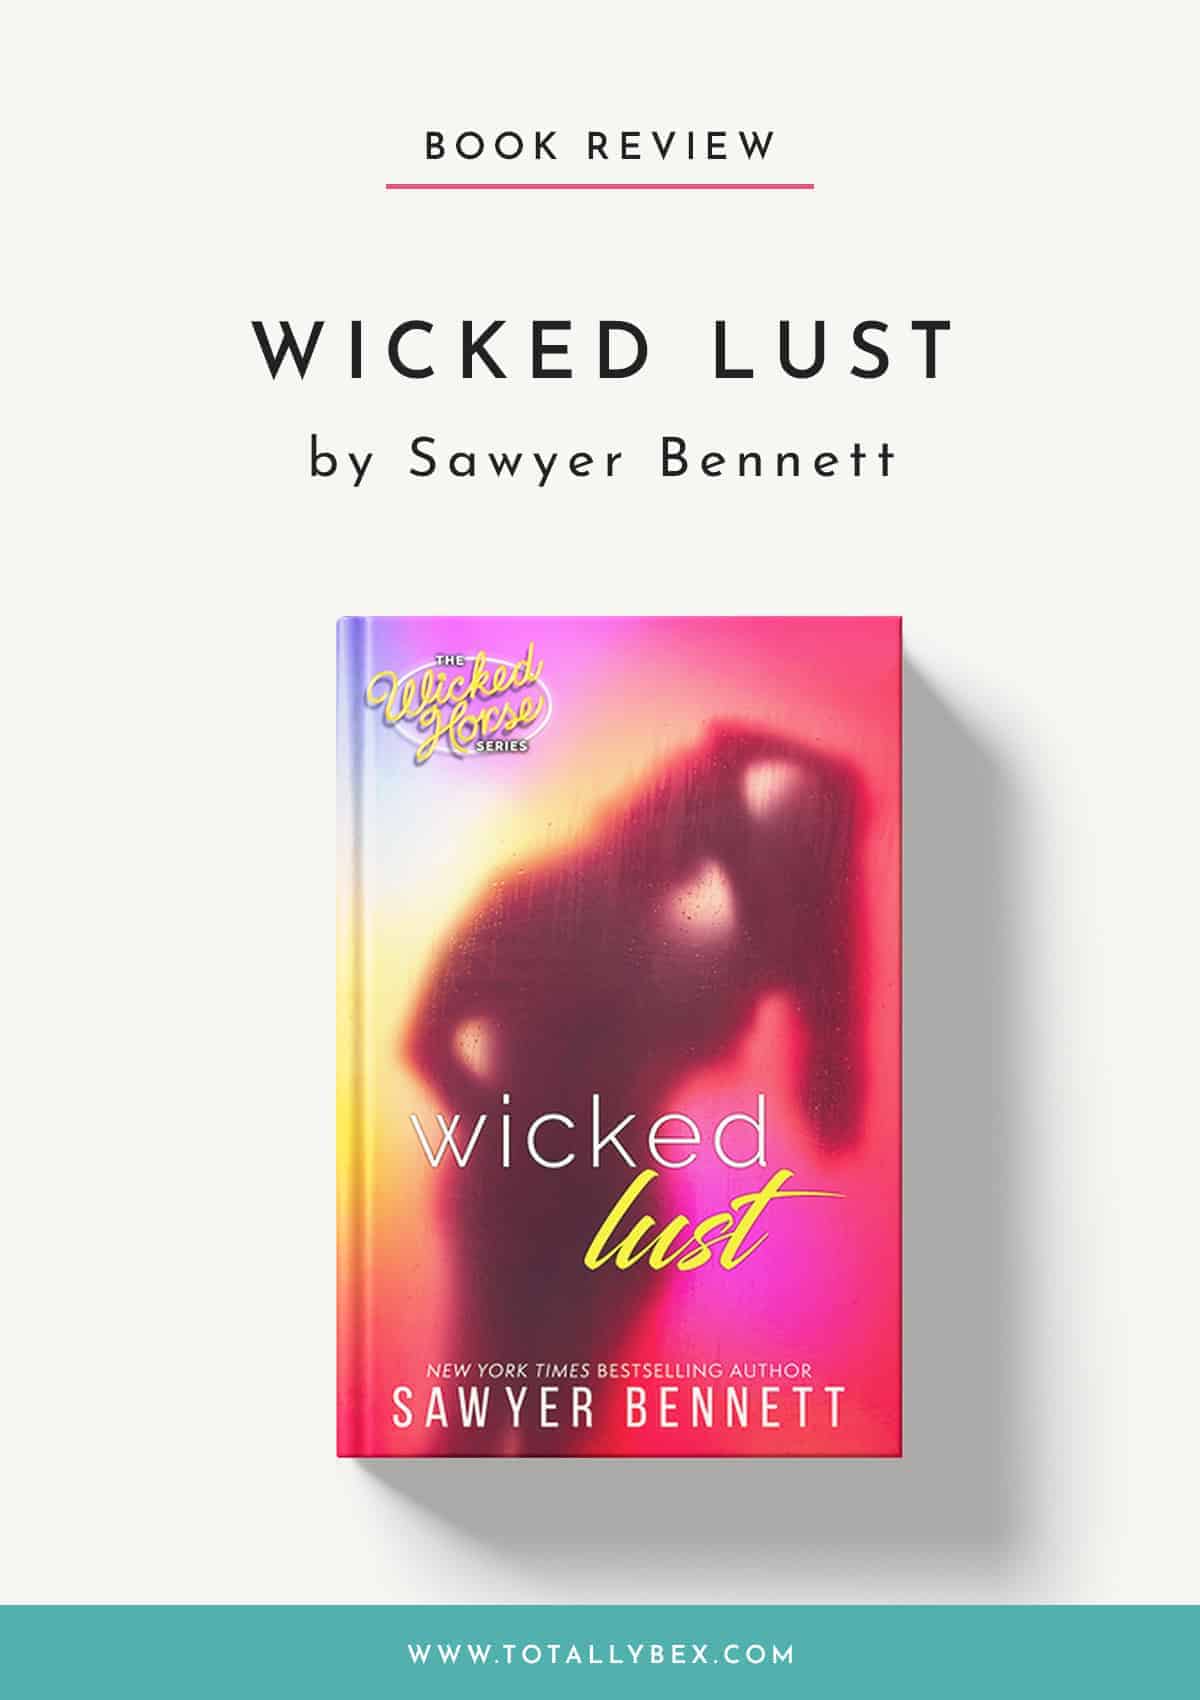 Wicked Lust by Sawyer Bennett-Book Review